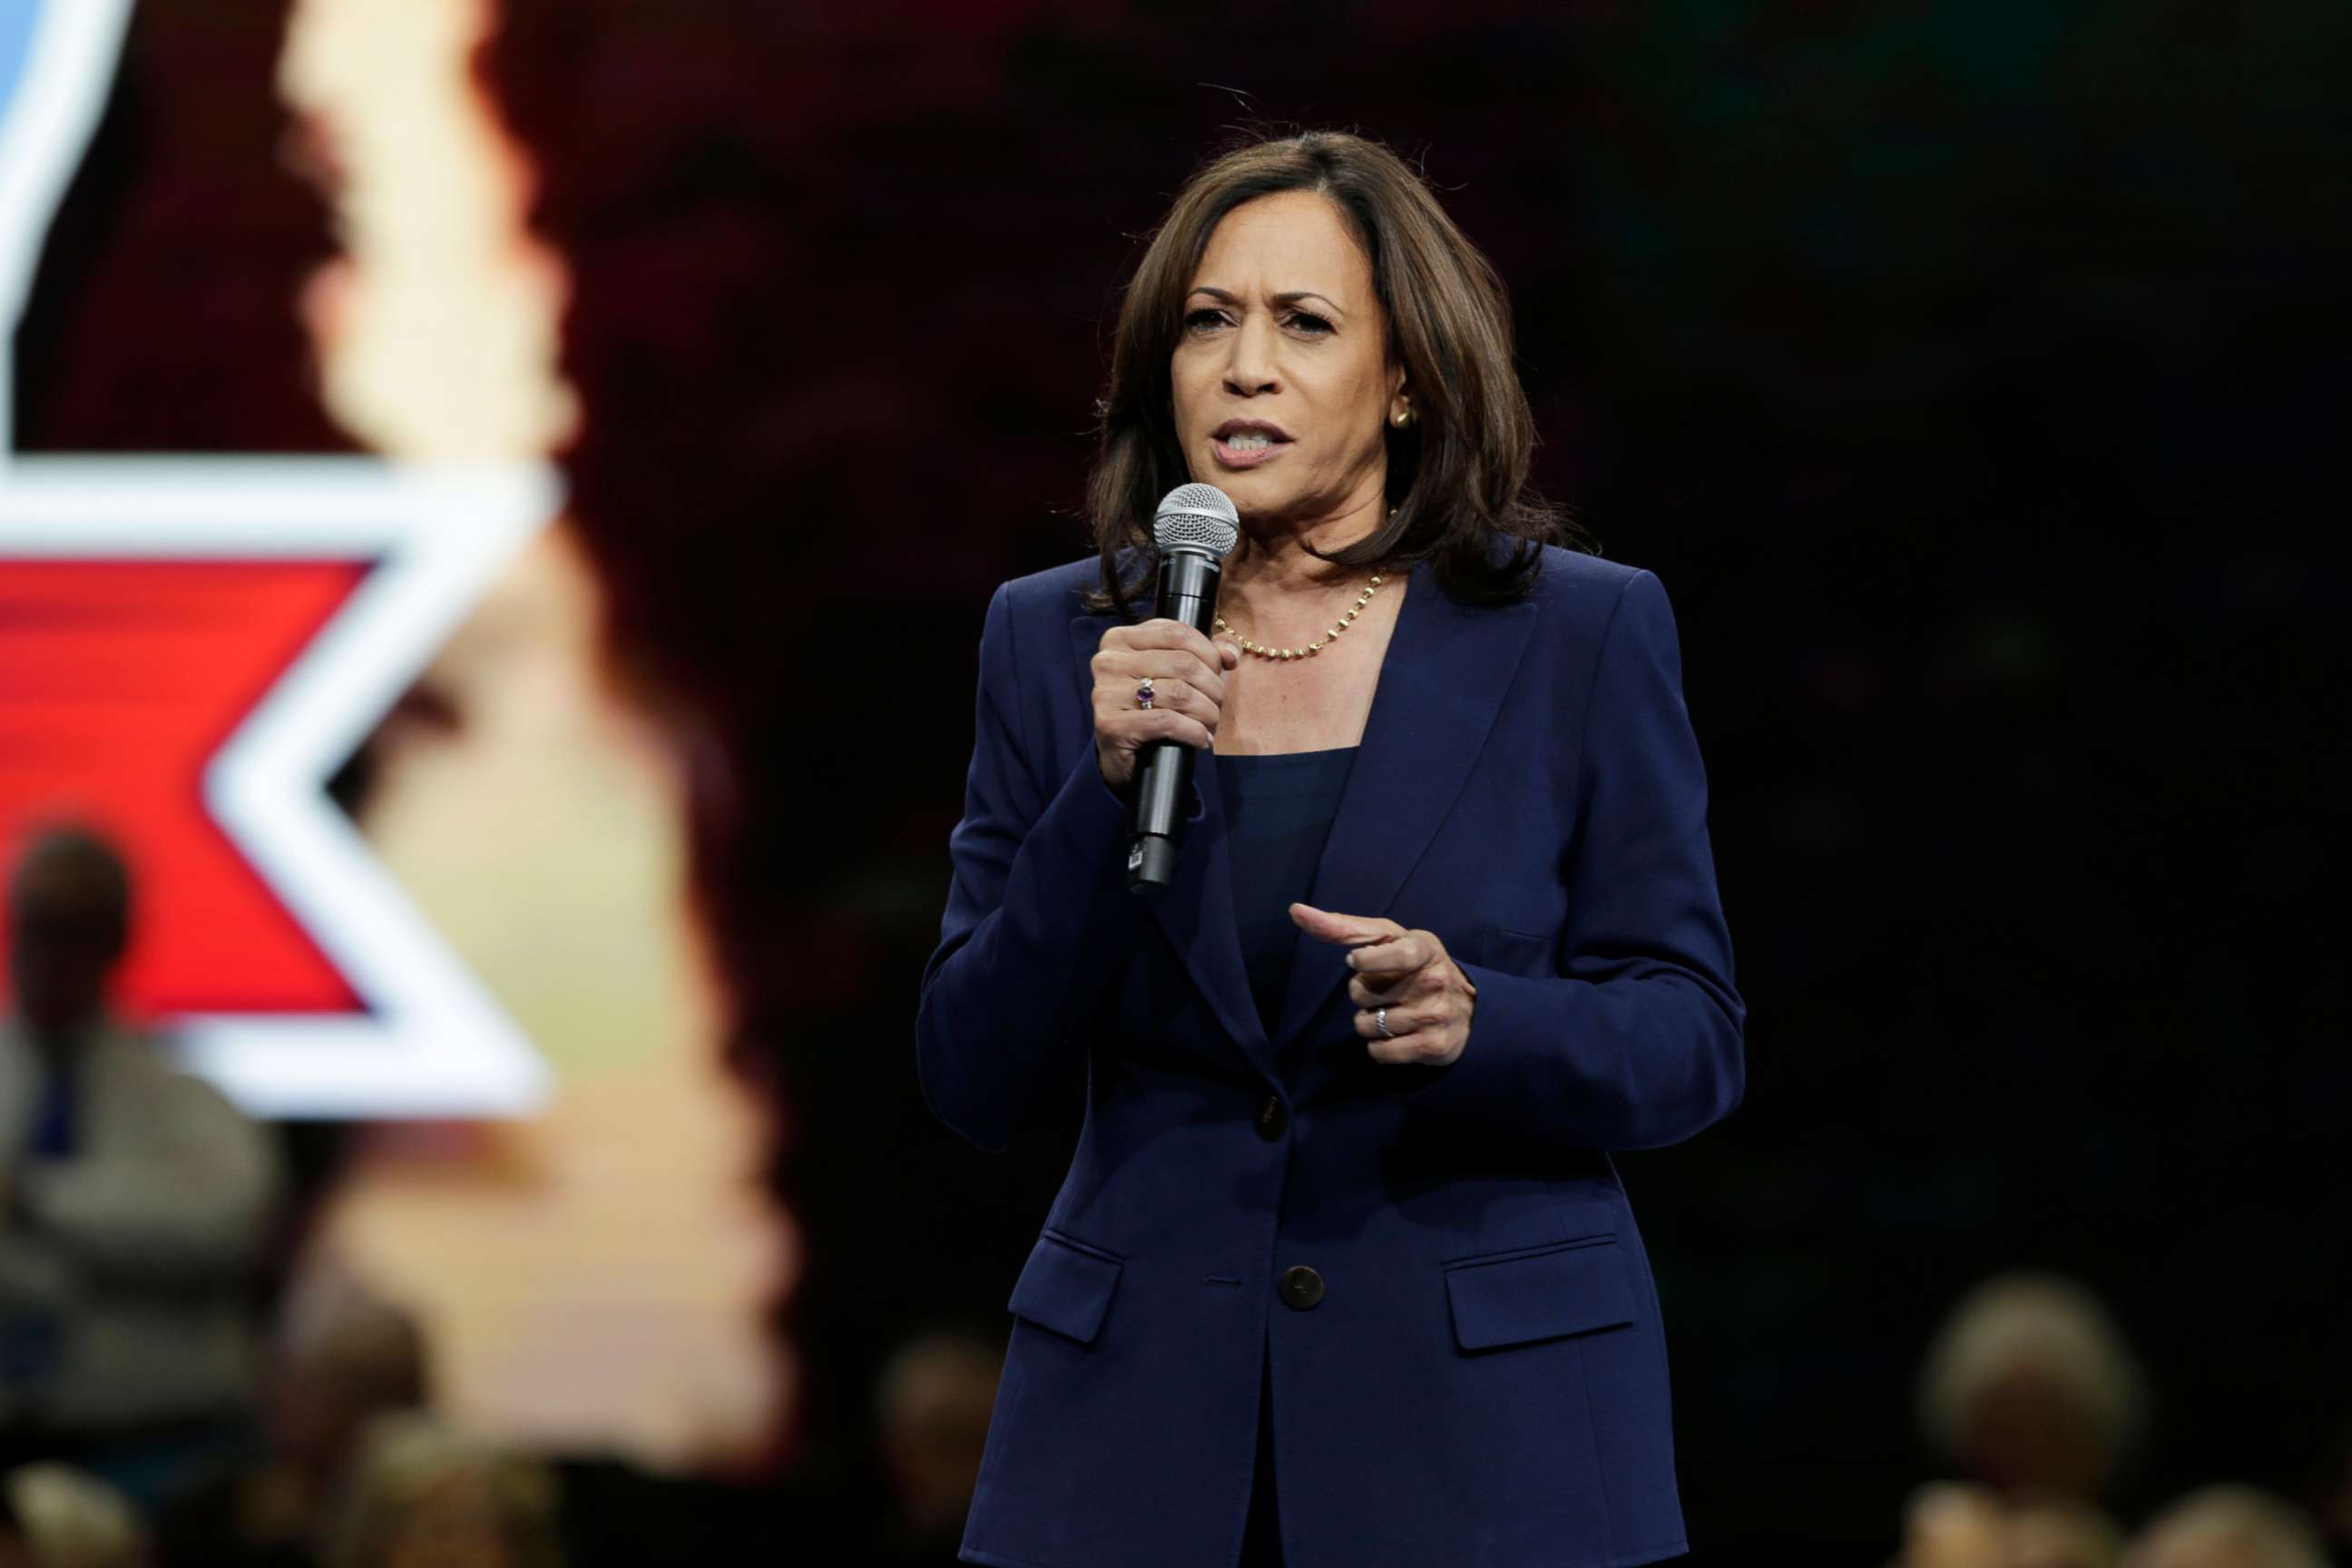 PHOTO: Democratic presidential candidate Sen. Kamala Harris speaks during the Iowa Democratic Party's Liberty and Justice Celebration, Nov. 1, 2019, in Des Moines, Iowa.